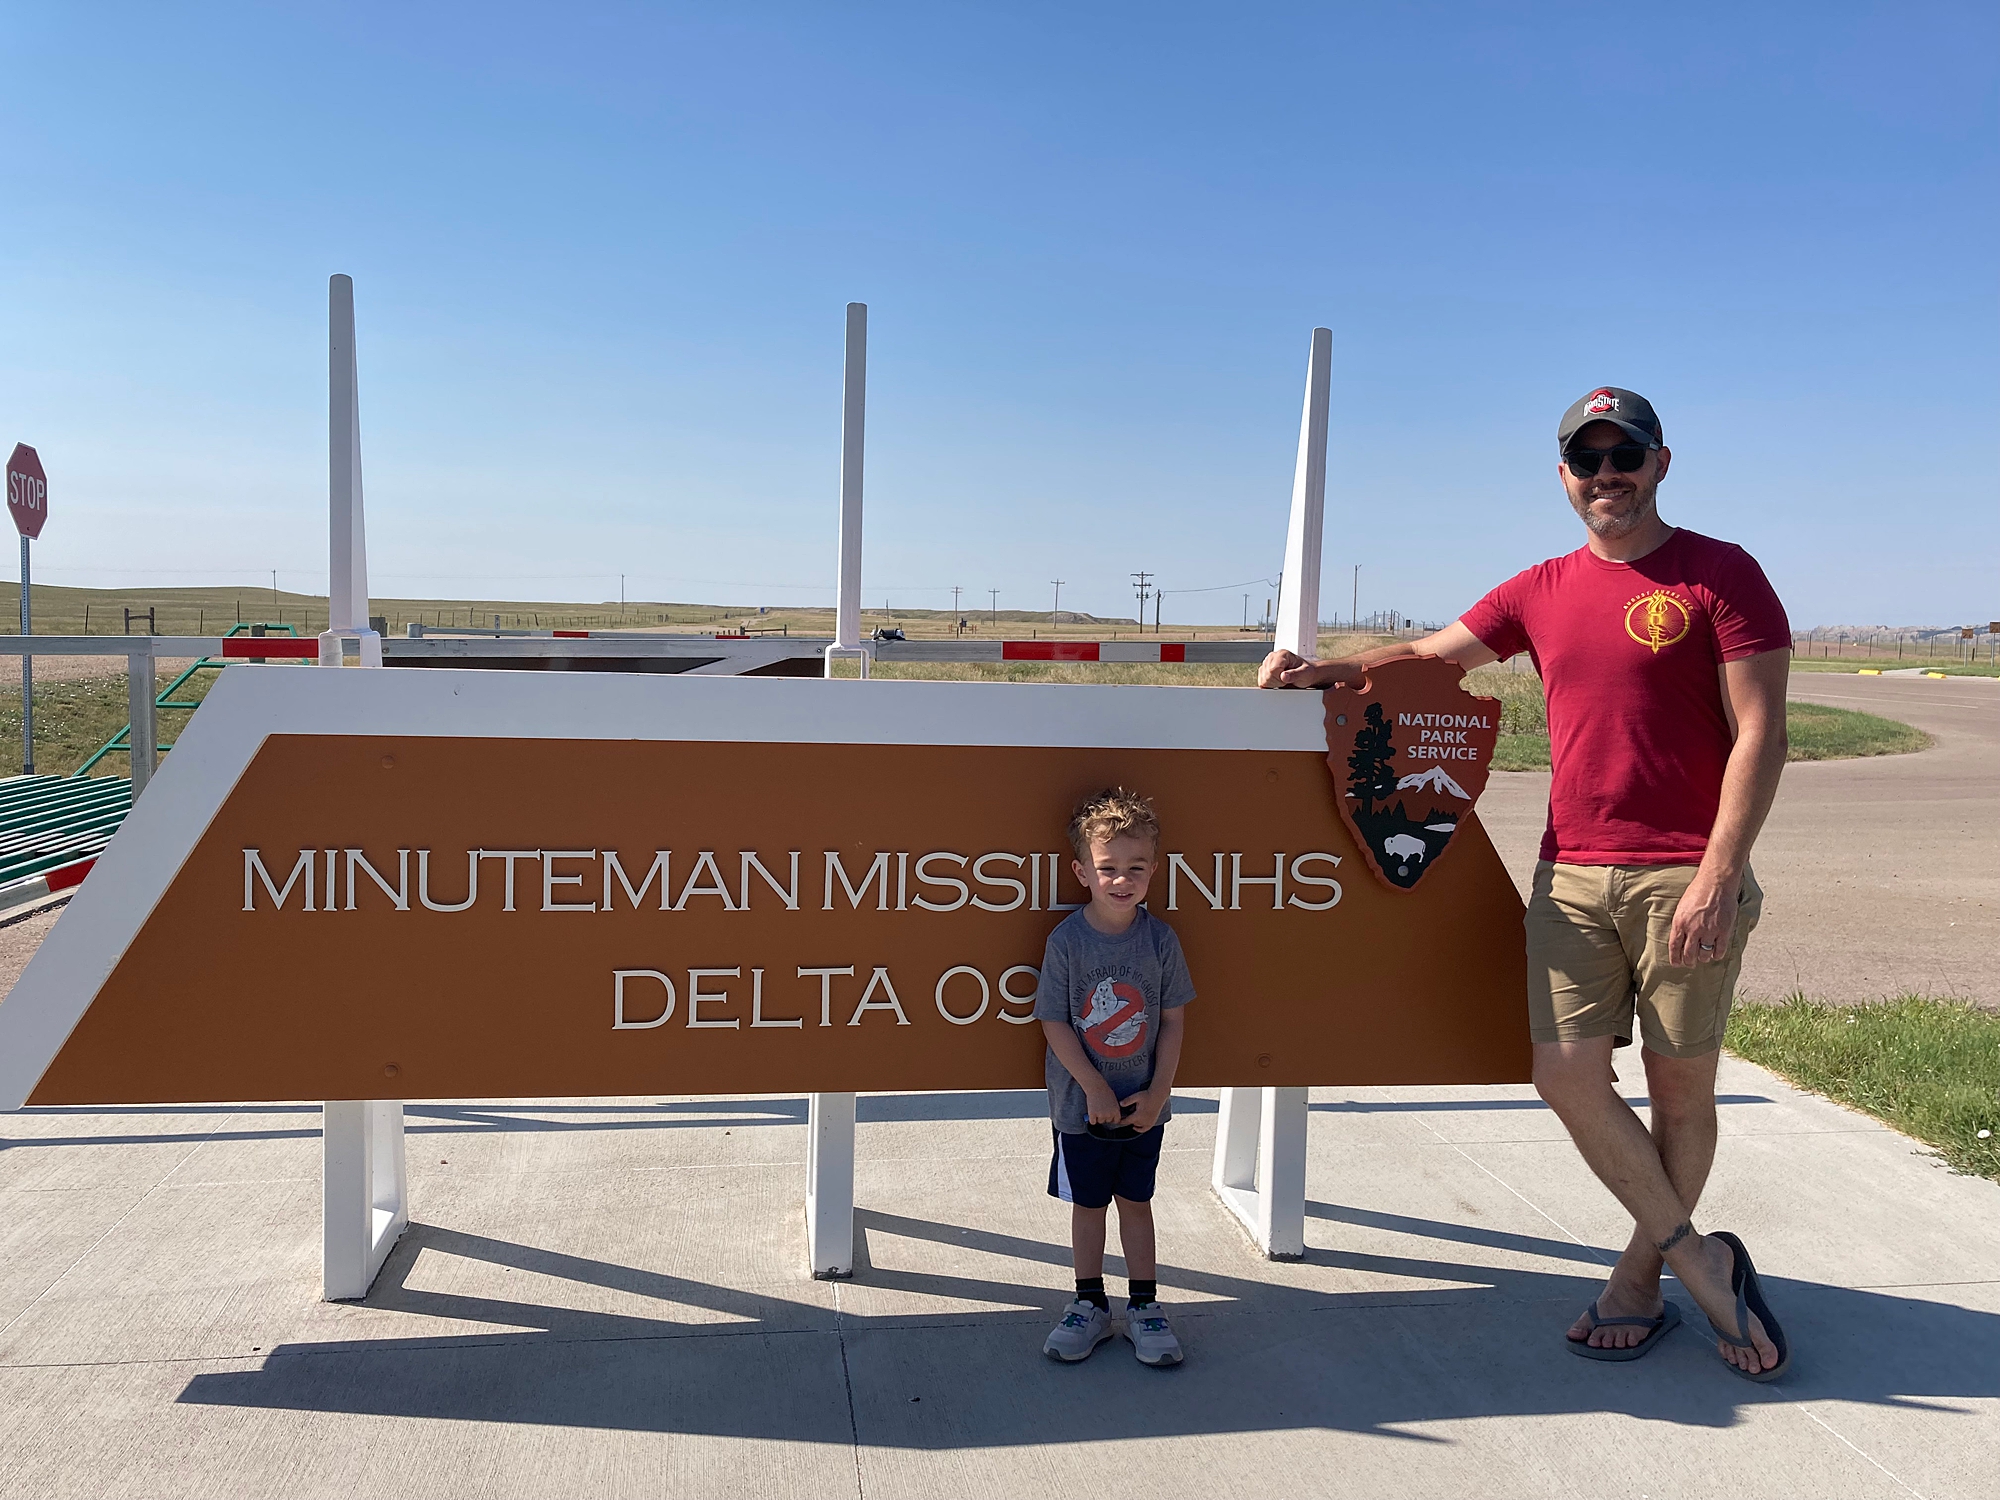 father_and_son_in_front_of_minutemen_missle_sign